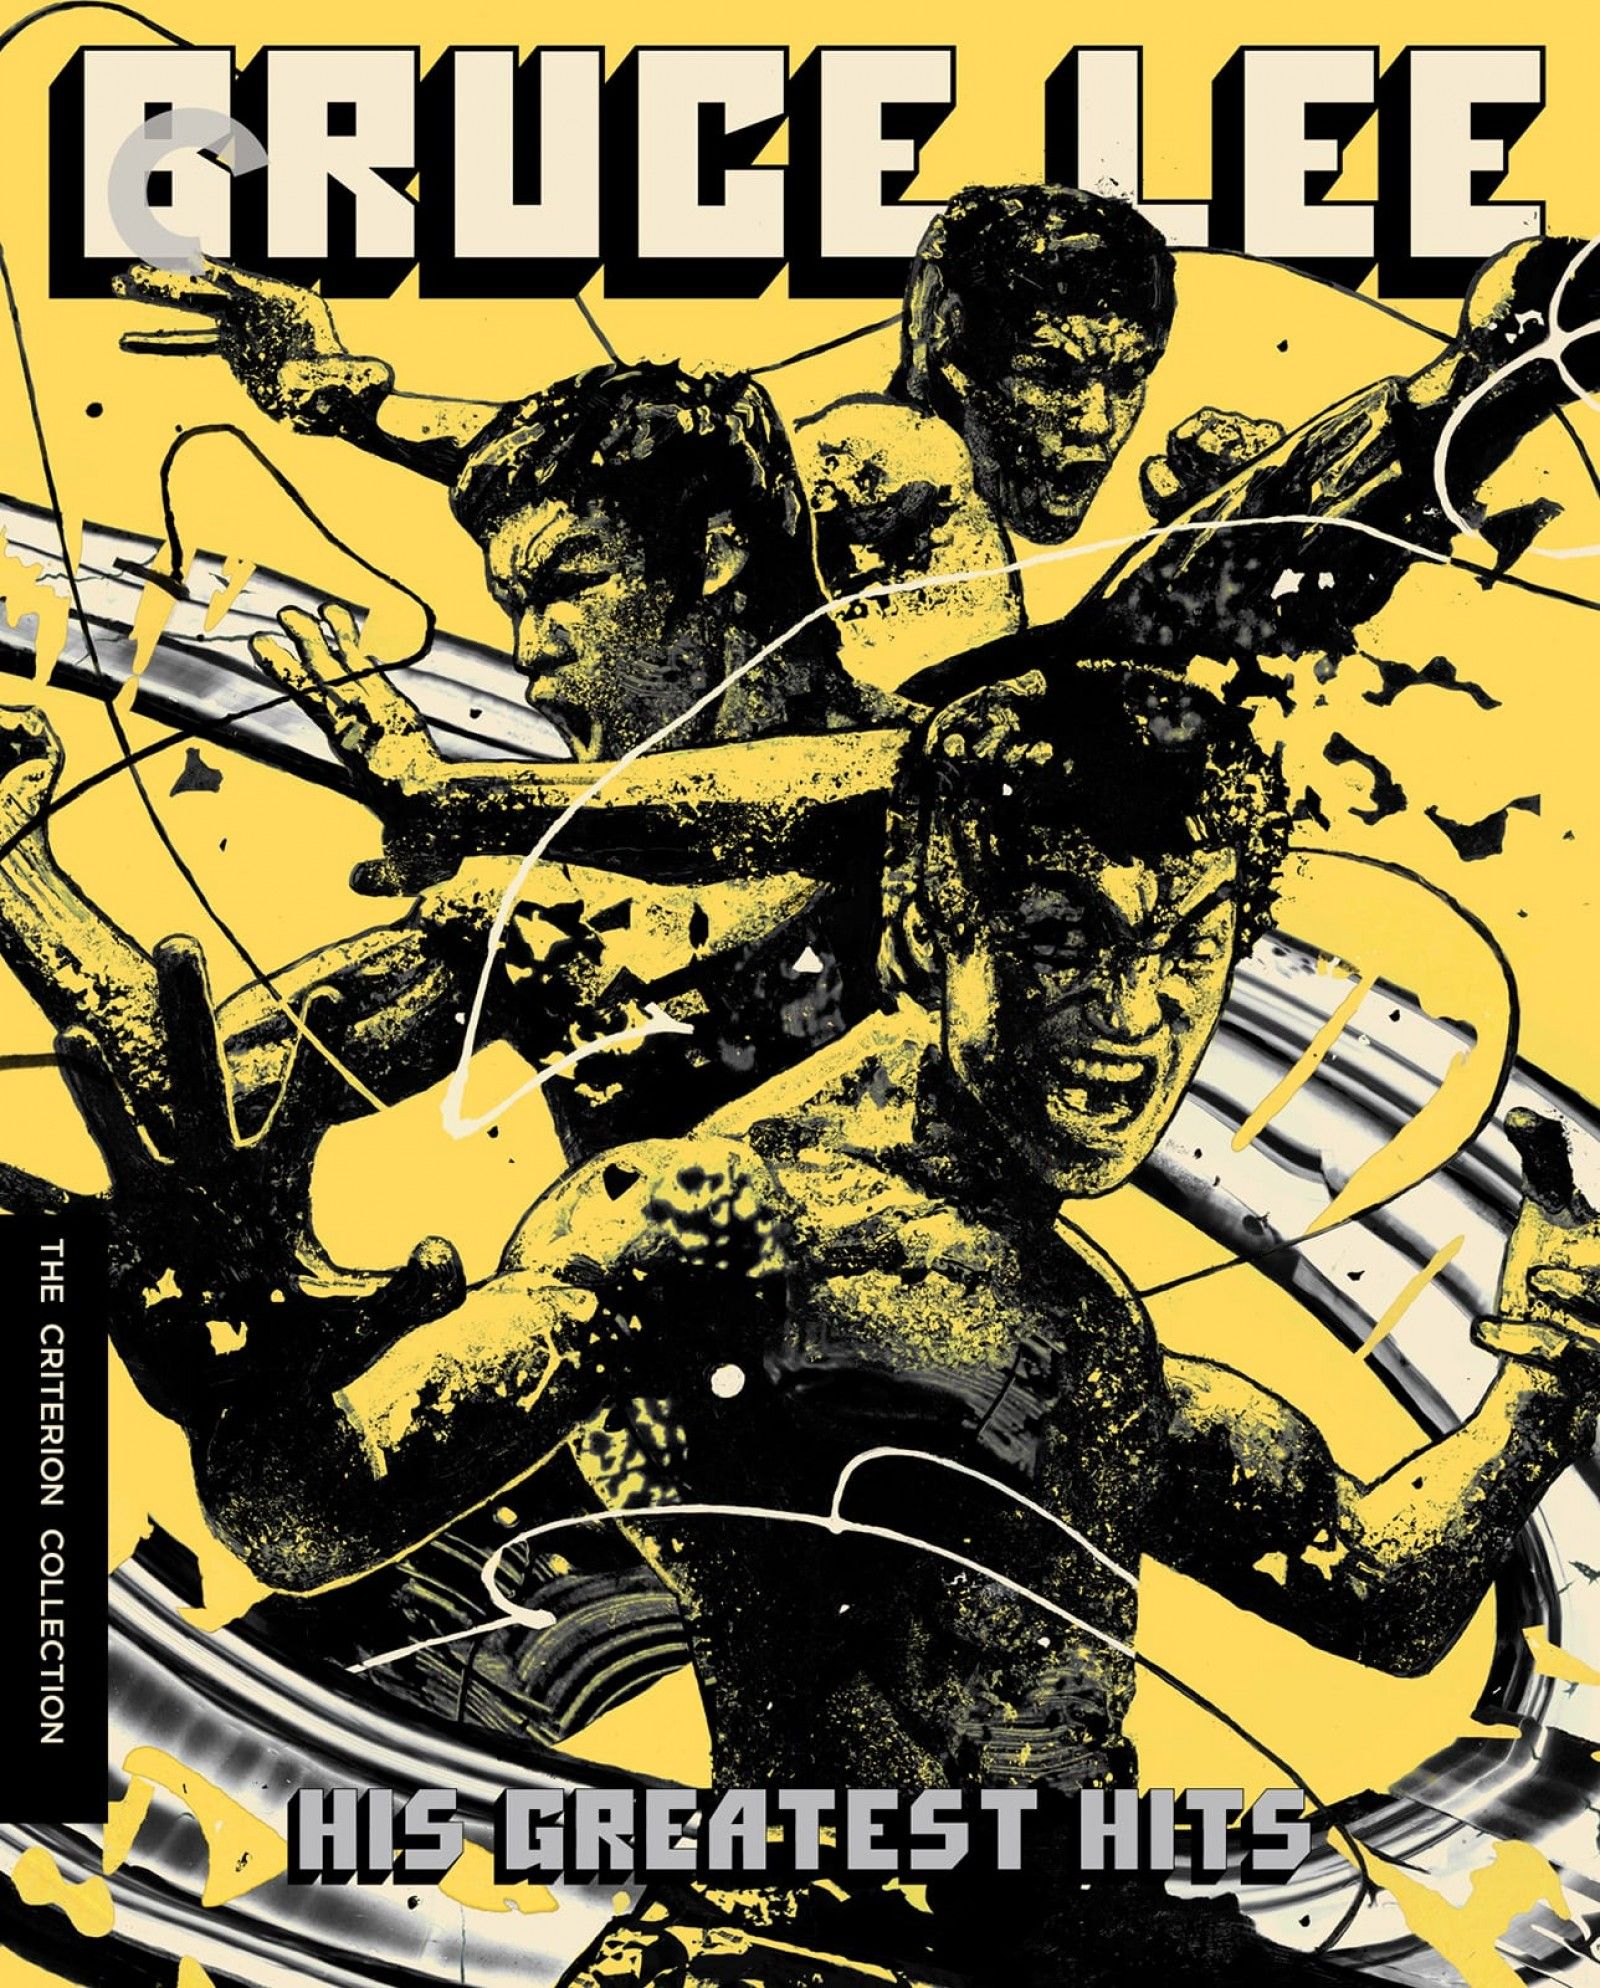 Bruce Lee: His Greatest Hits. The Criterion Collection